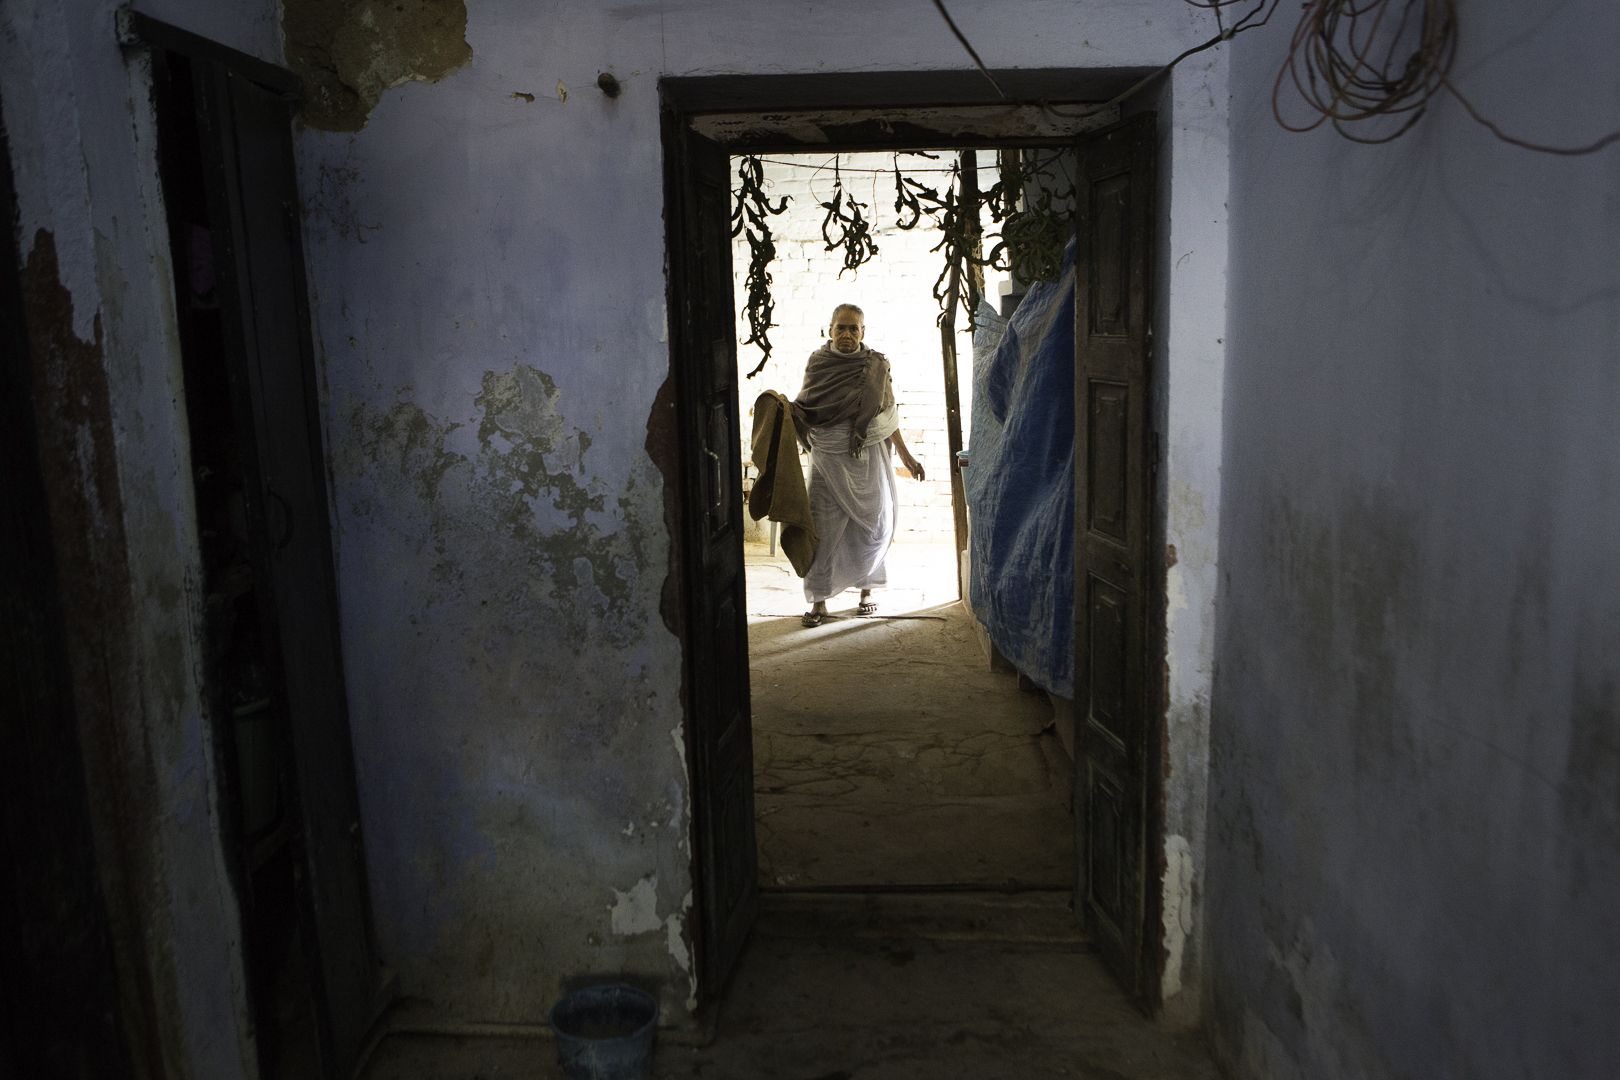 A hallway in the elderly widow area of Tarash Mandir, a short-stay home for young women and permanent facility for elderly widows in Vrindavan